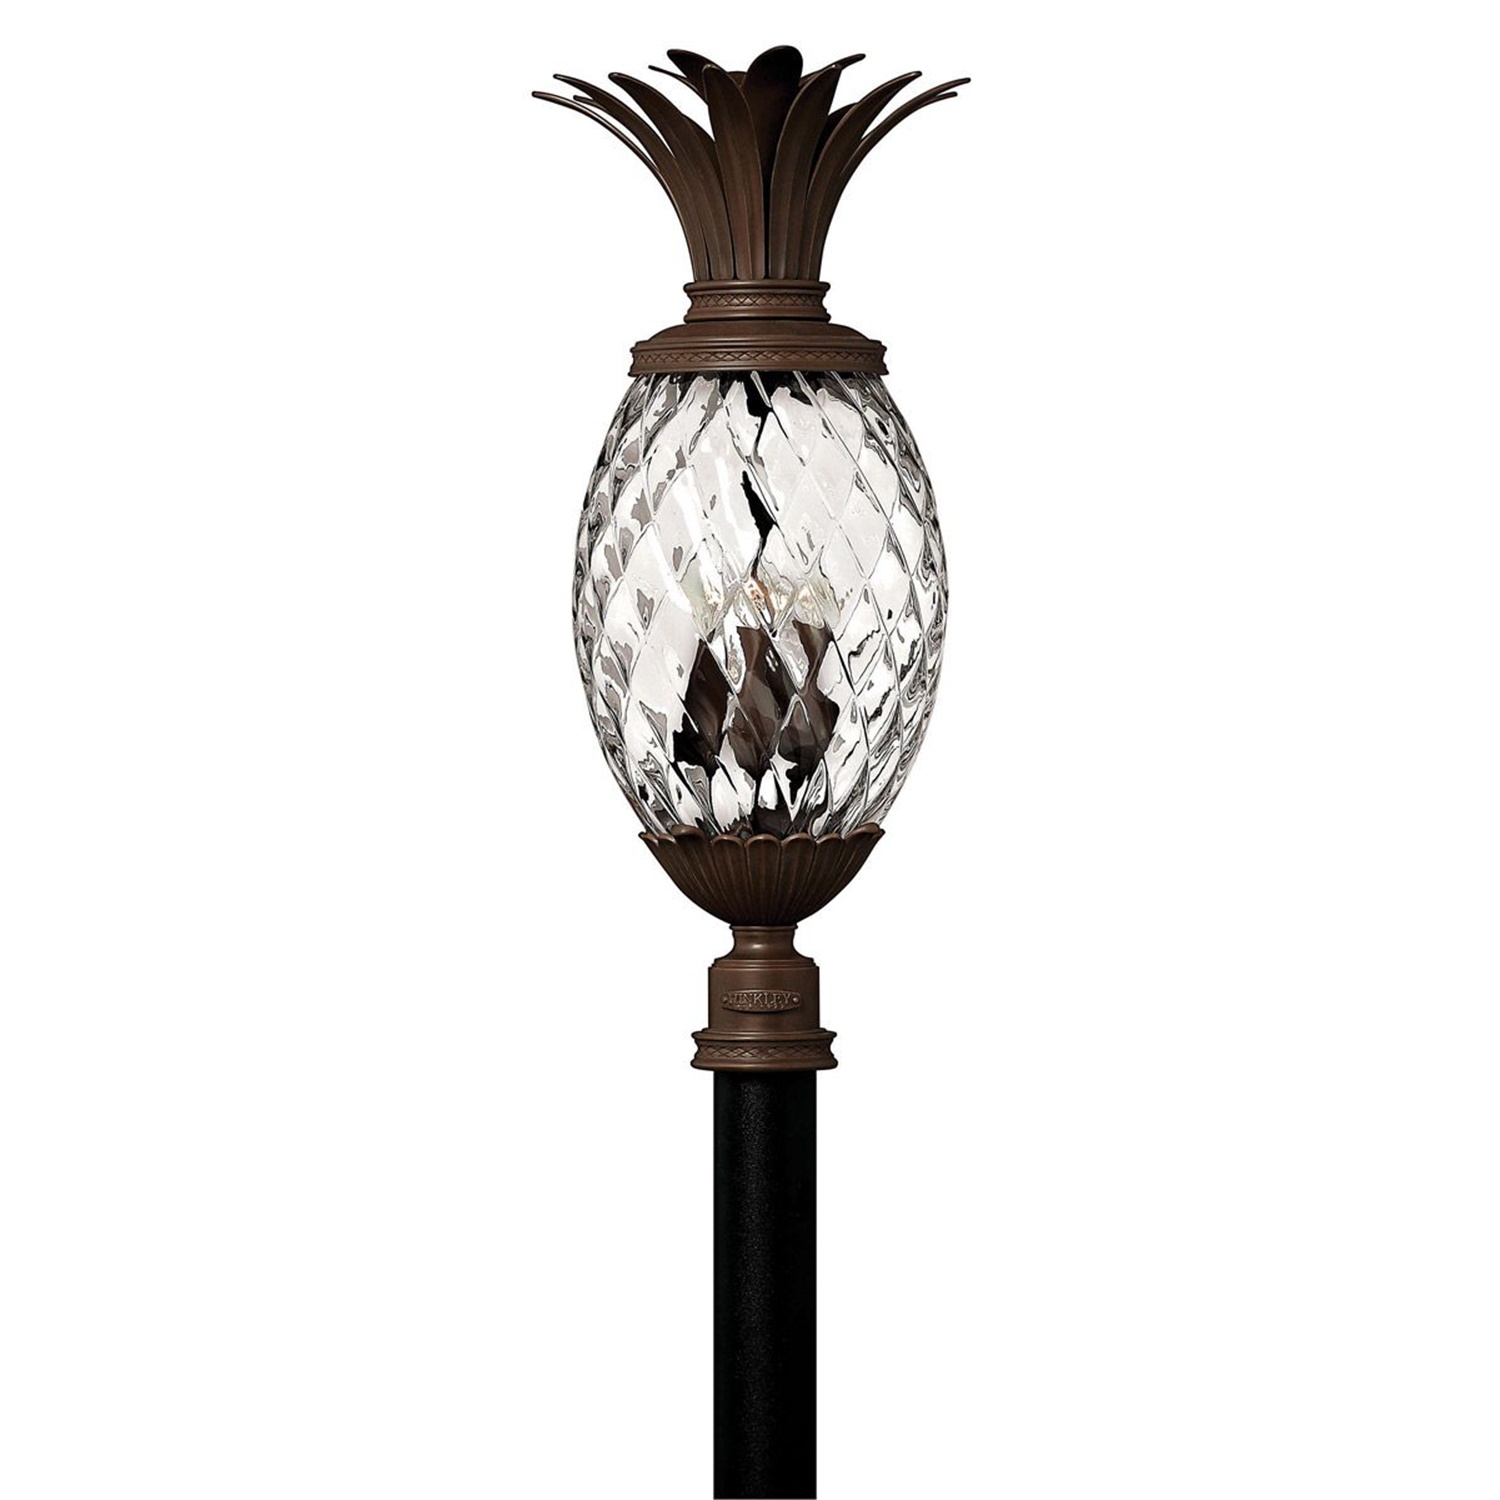 HinkleyPlantation Outdoor Extra Large Pineapple Post Light in Copper Bronze